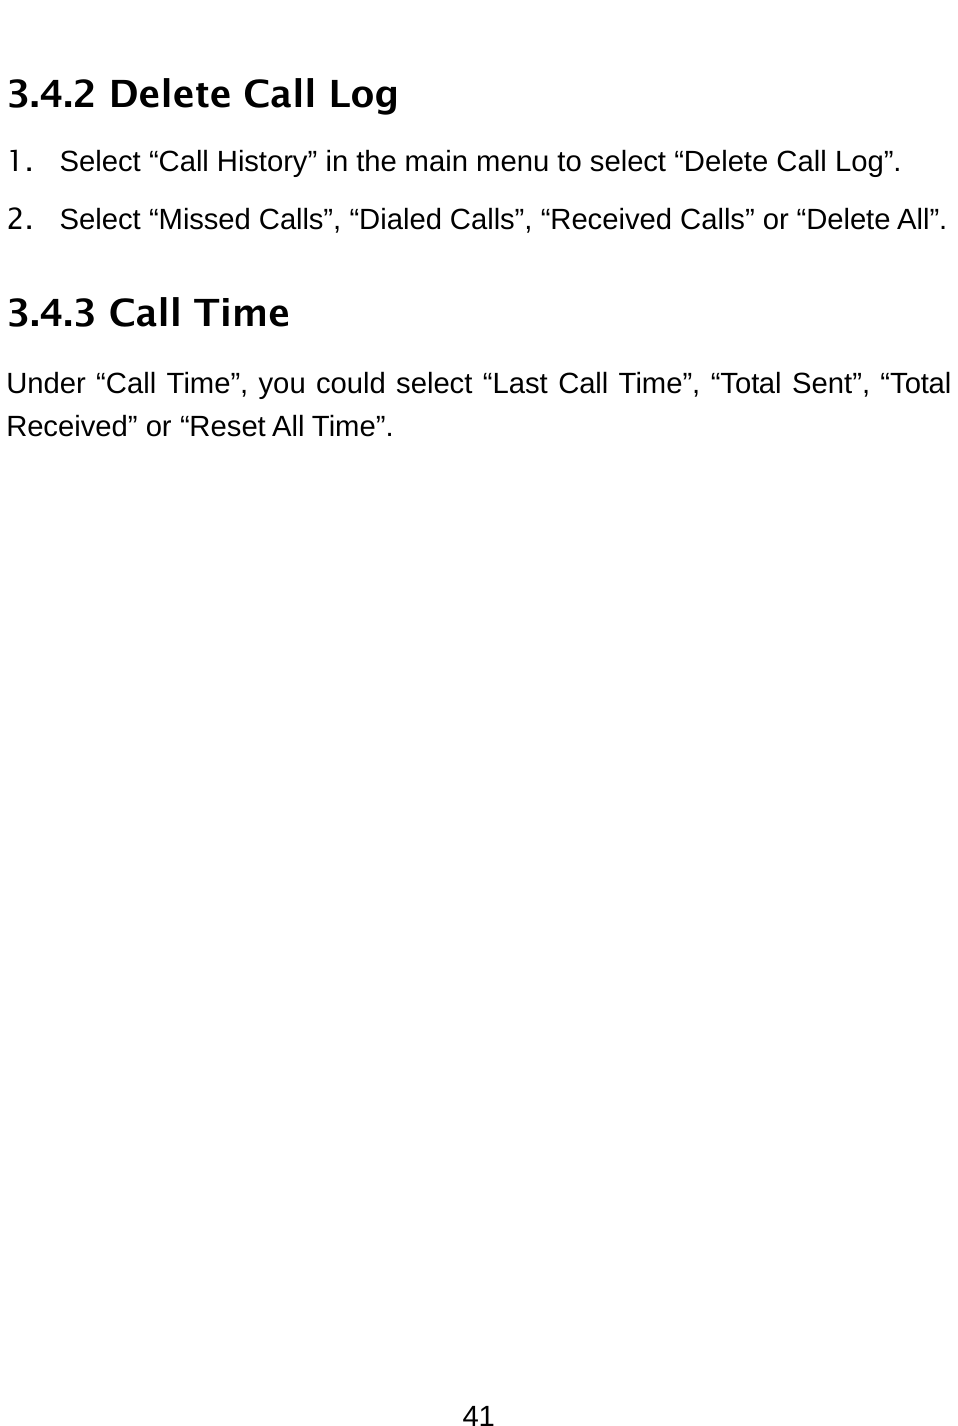  41 3.4.2 Delete Call Log 1.  Select “Call History” in the main menu to select “Delete Call Log”. 2.  Select “Missed Calls”, “Dialed Calls”, “Received Calls” or “Delete All”.   3.4.3 Call Time Under “Call Time”, you could select “Last Call Time”, “Total Sent”, “Total Received” or “Reset All Time”. 